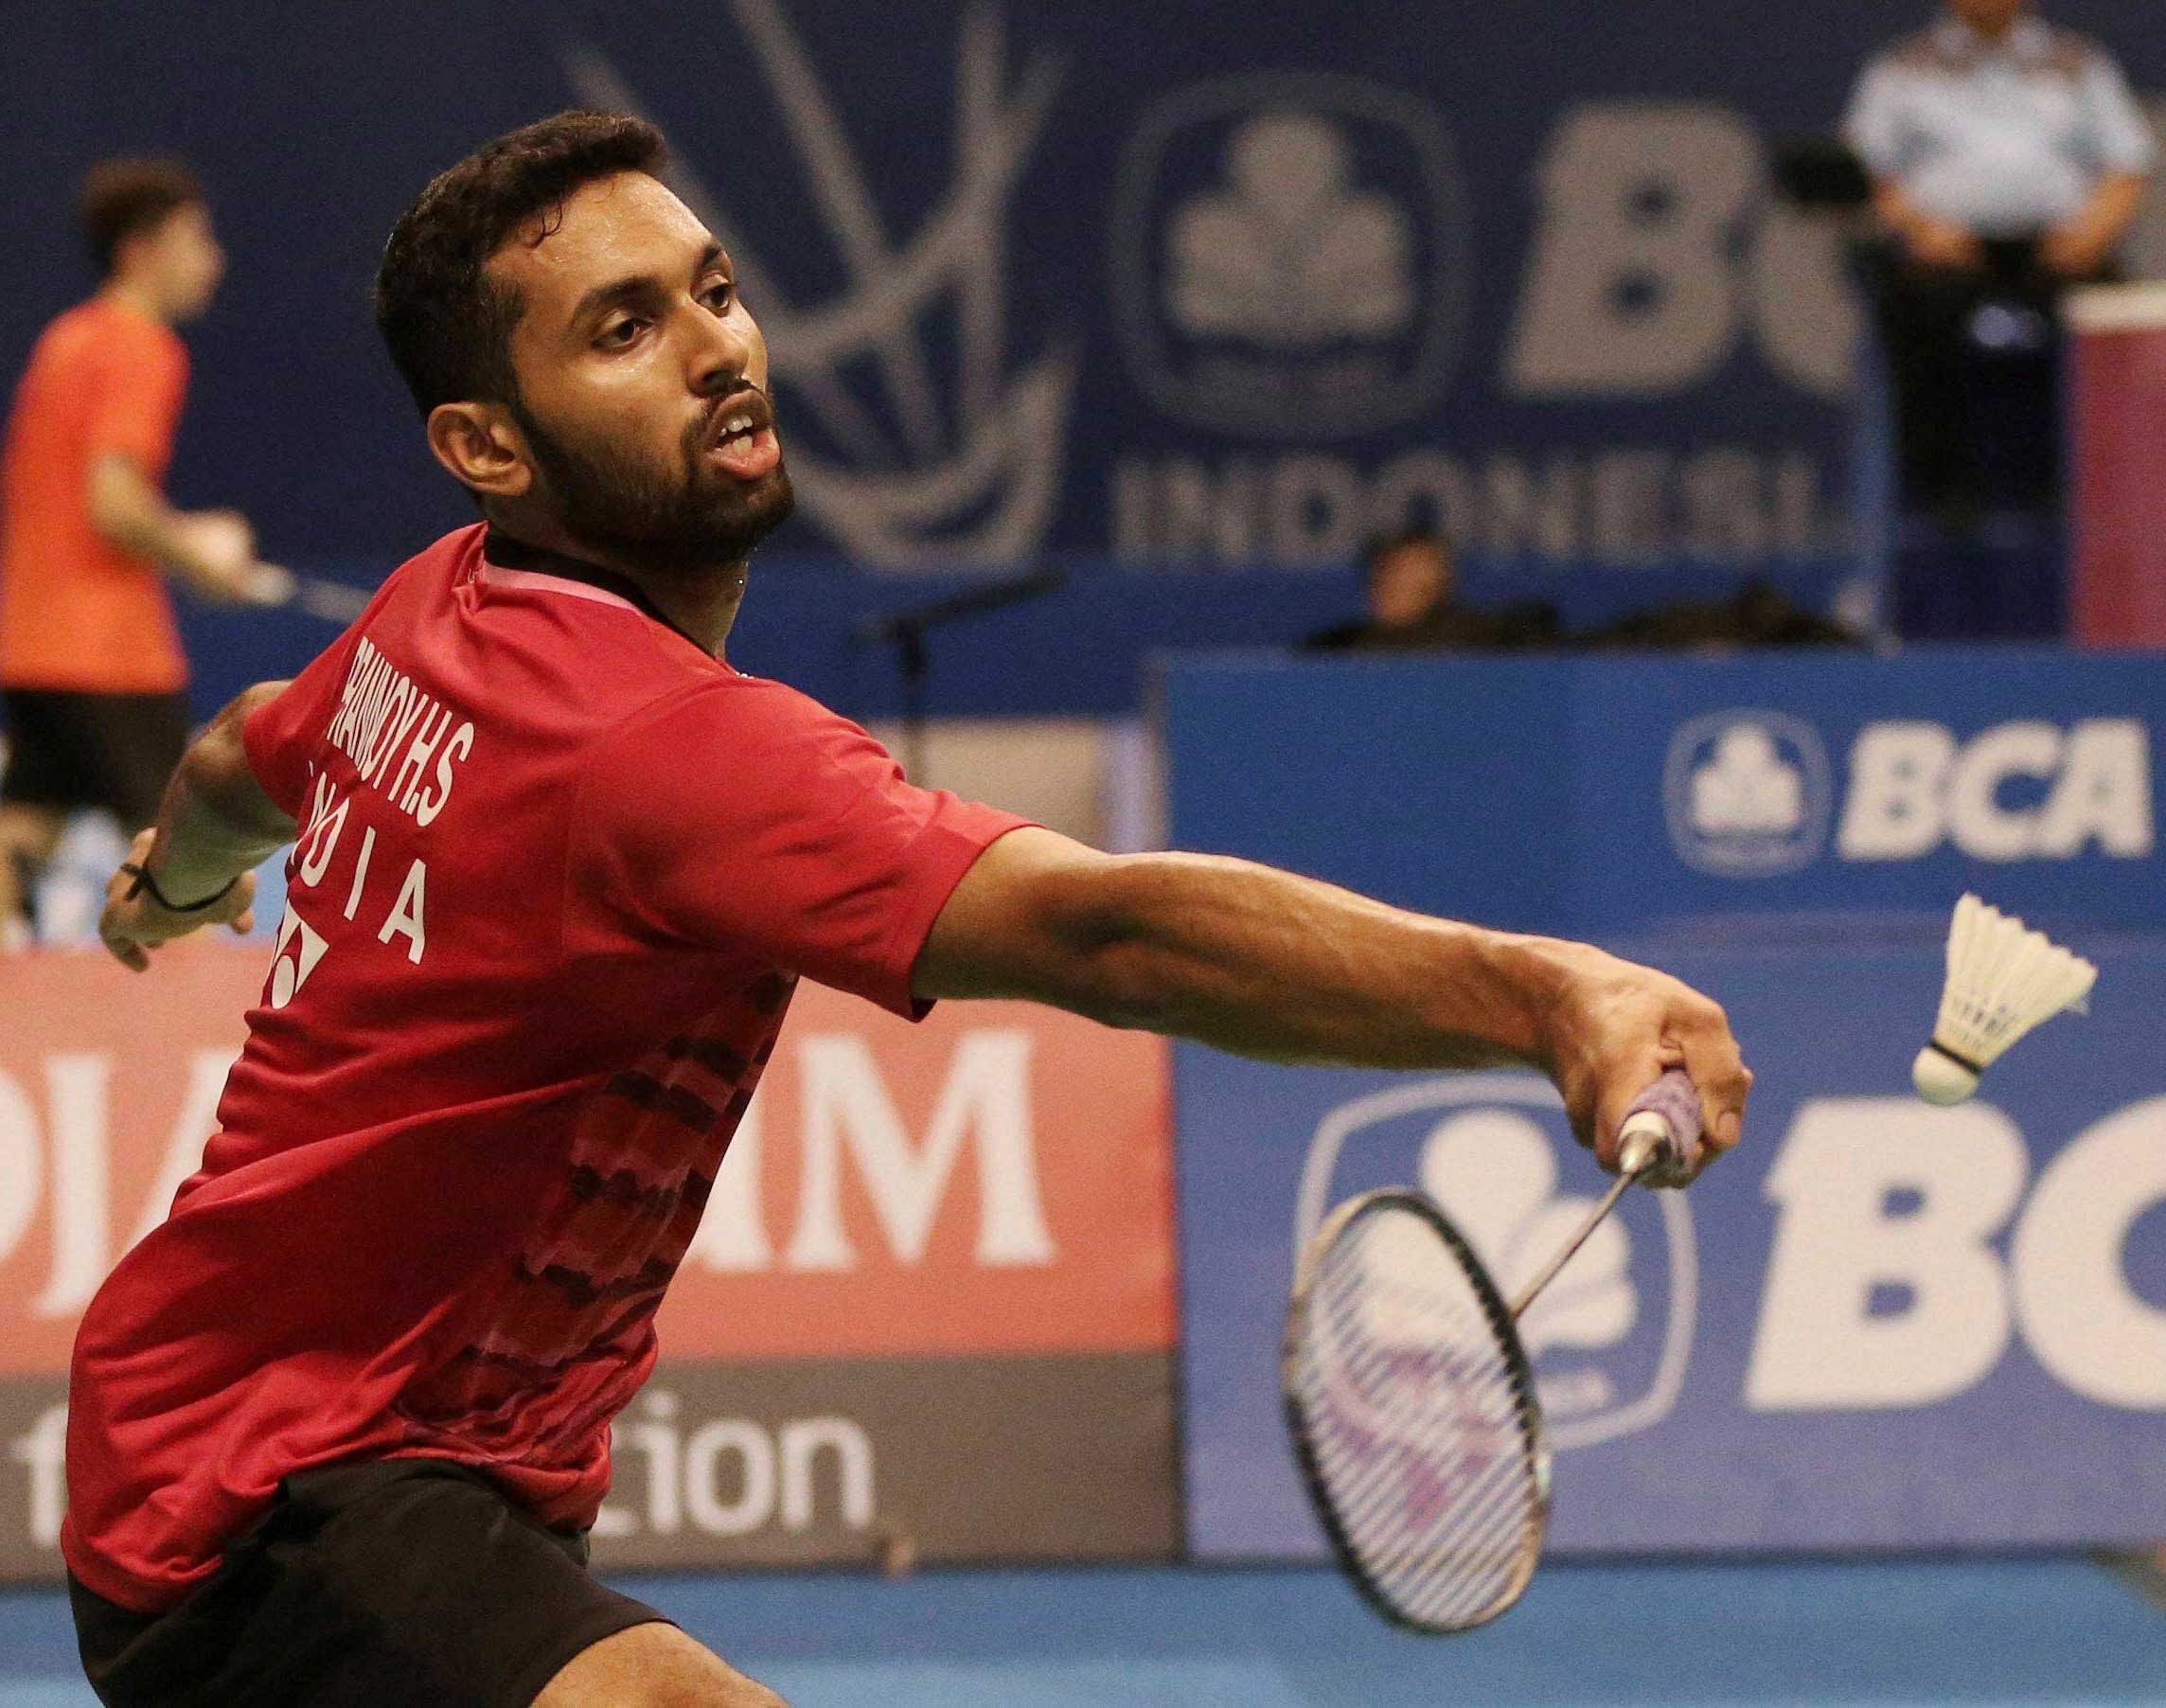 In the first game, Prannoy and Sakai were locked 2-2 early on but the Indian soon moved ahead to first make it 4-2 before entering the break with a healthy 11-6 lead. Representational Image. Photo credit: PTI.